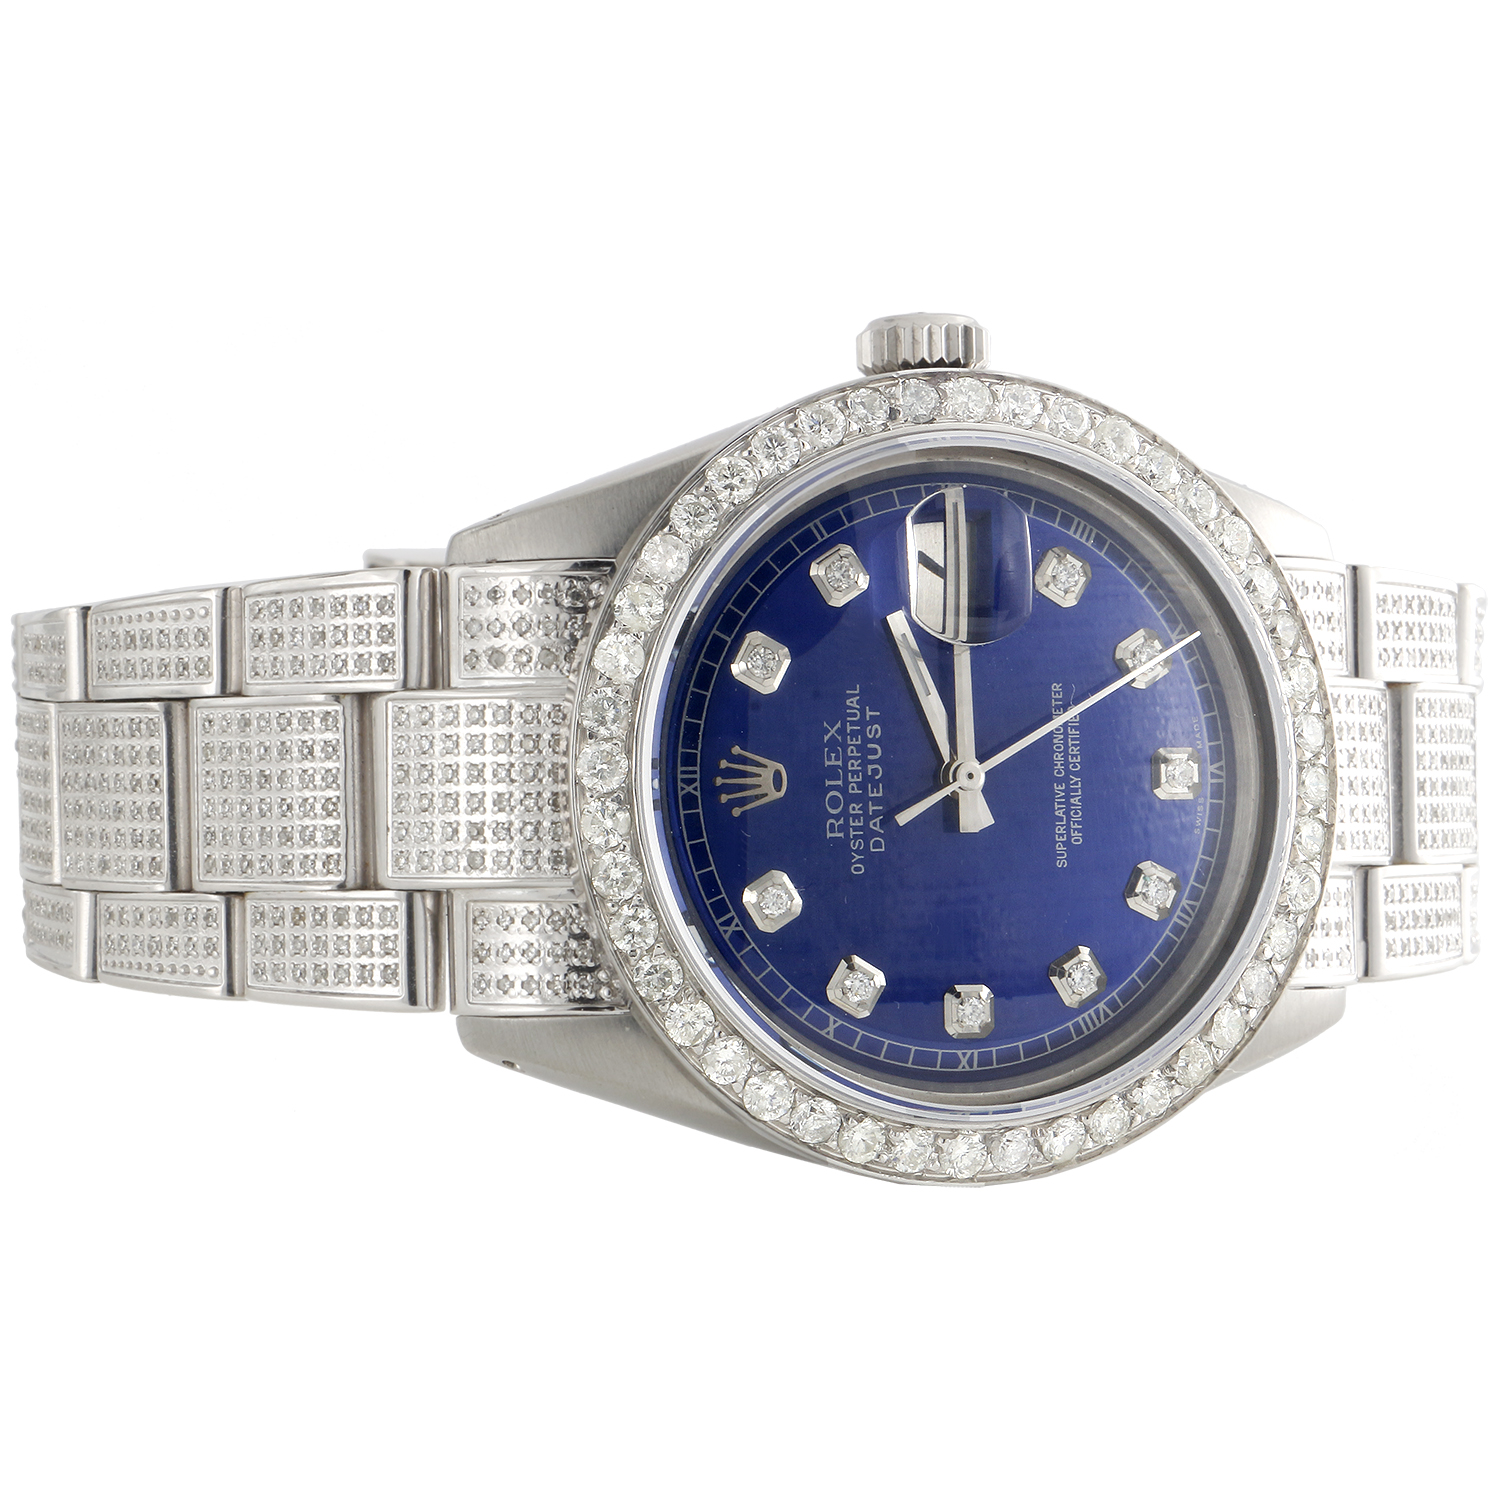 Mens Rolex 36mm DateJust Diamond Watch Fully Iced Band Custom Blue Dial 5.10 CT. - image 2 of 8